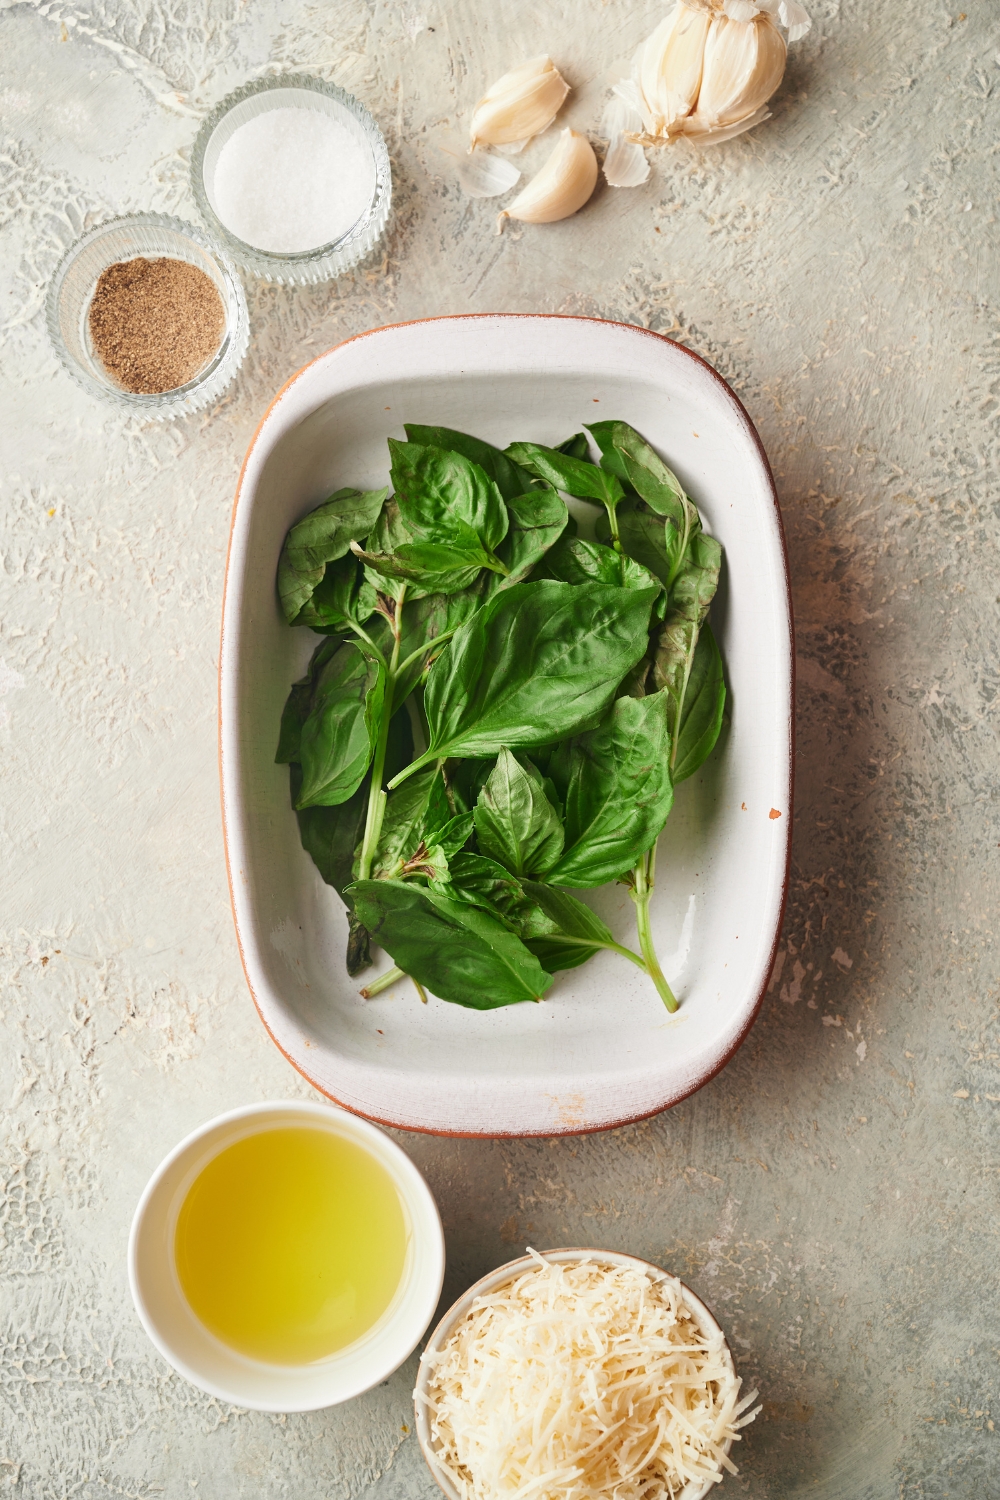 An assortment of ingredients including a baking dish filled with fresh basil, garlic cloves, and bowls of oil, parmesan cheese, salt, and pepper.